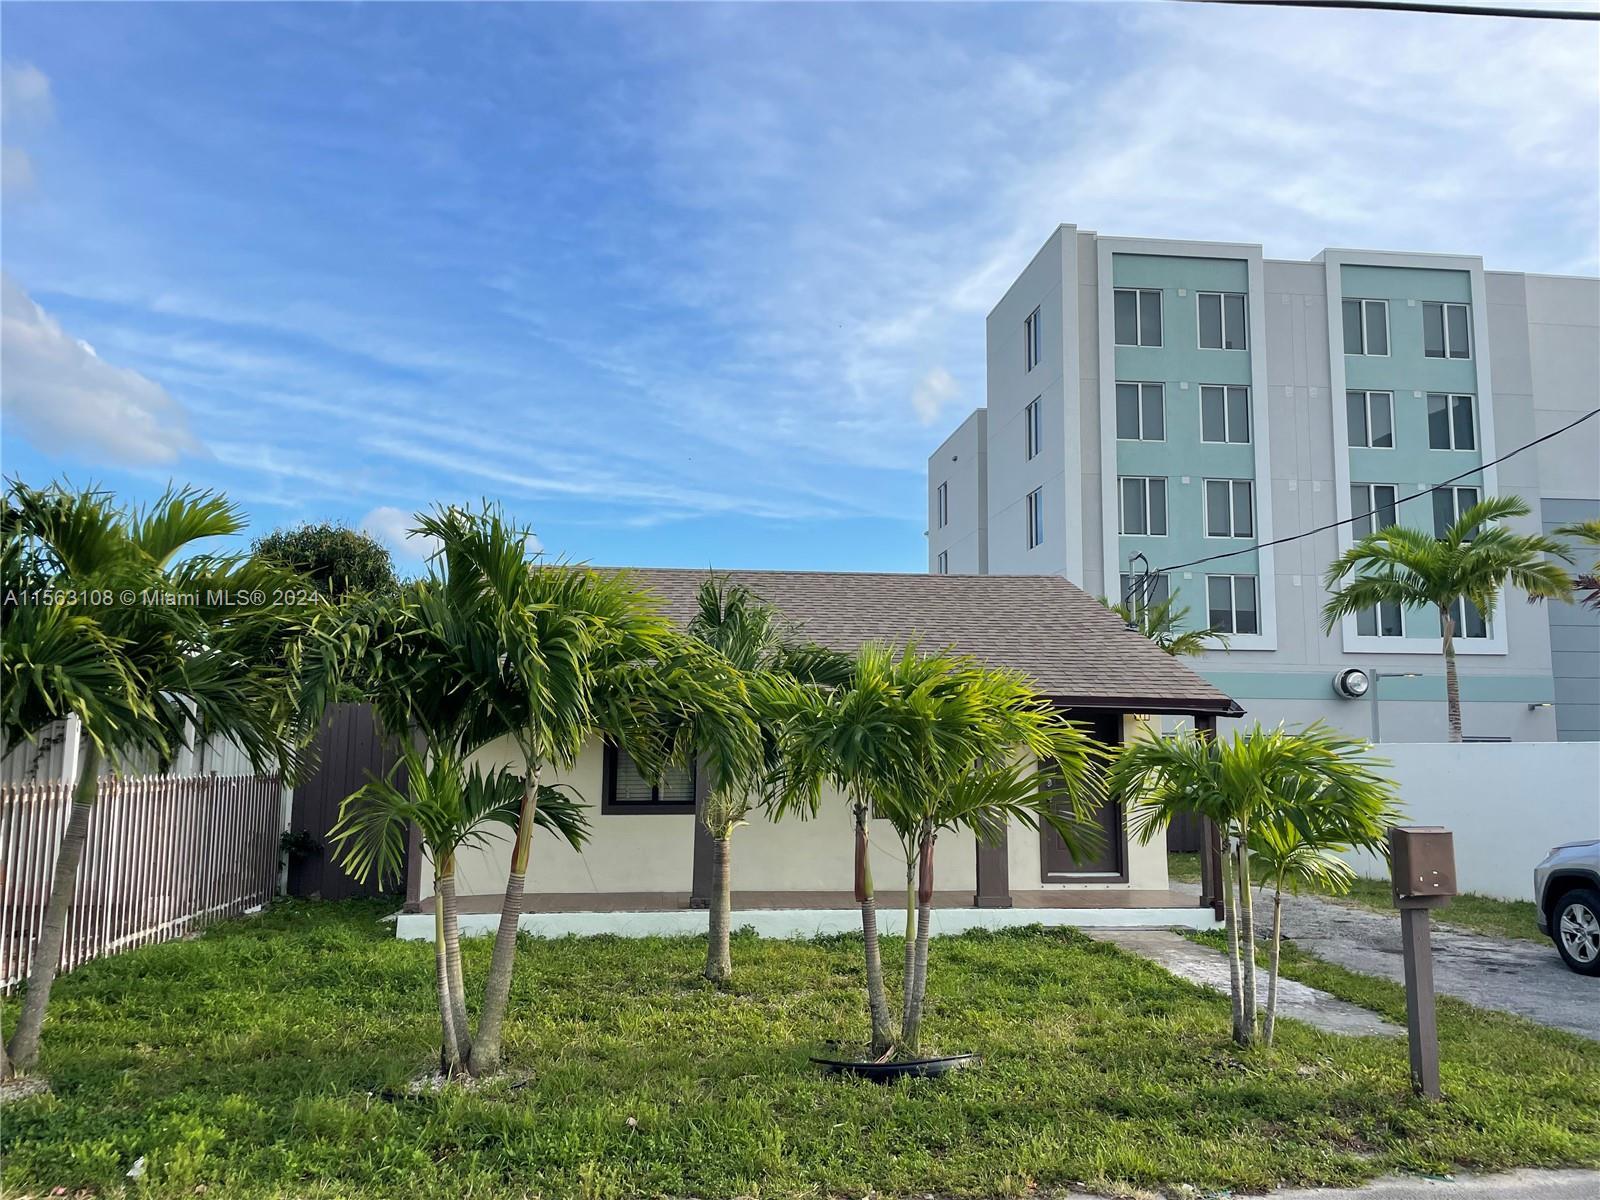 Photo of 2470 NW 55th St #2470 in Miami, FL